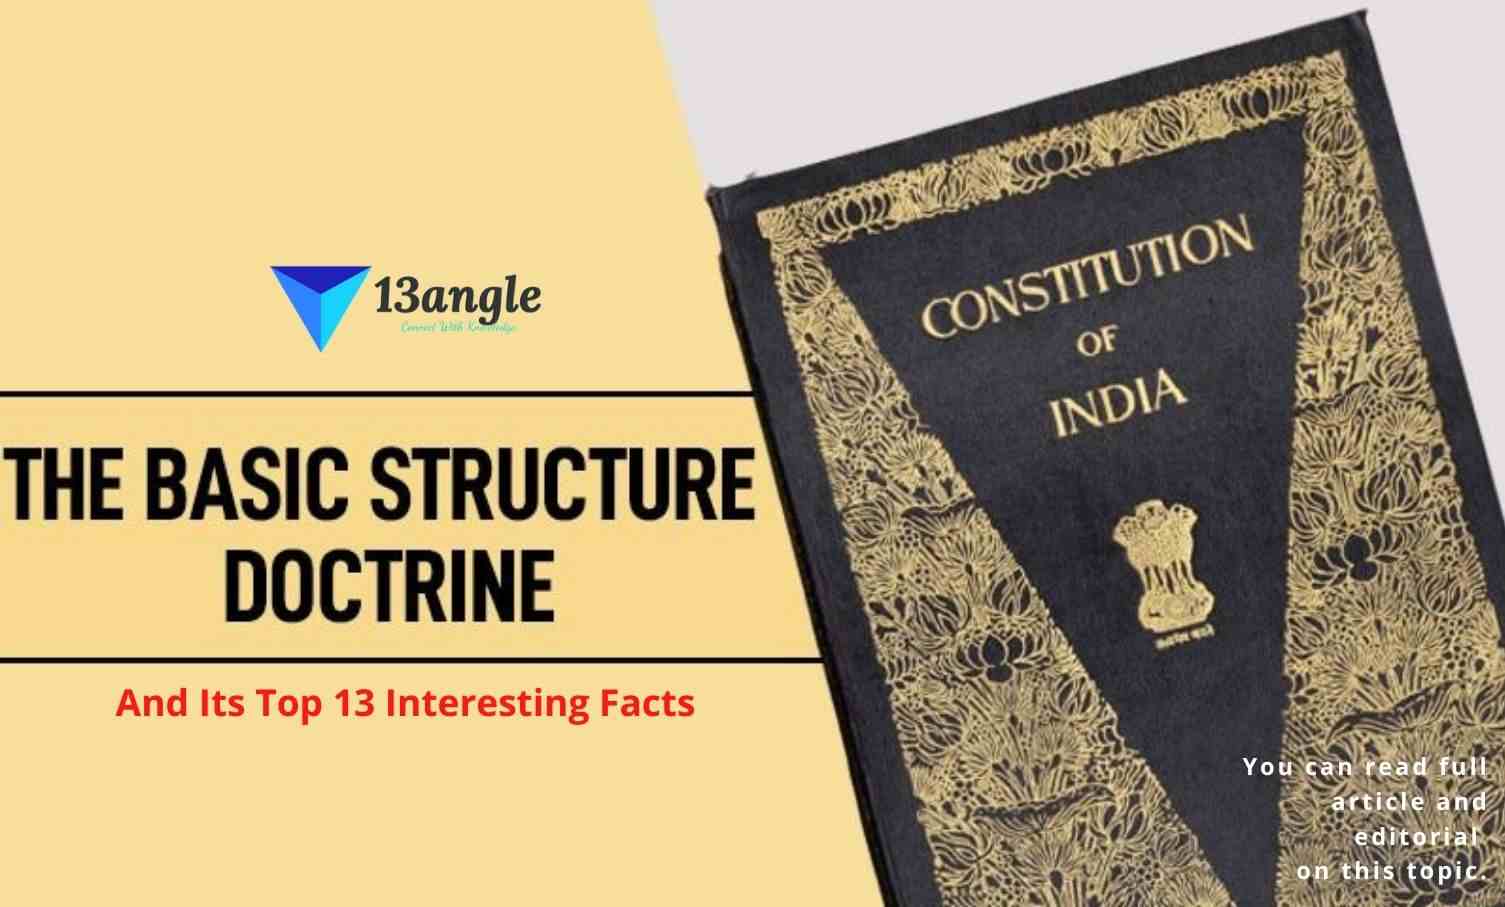 Basic Structure Doctrine And Its Top 13 Interesting Facts- 13angle.com